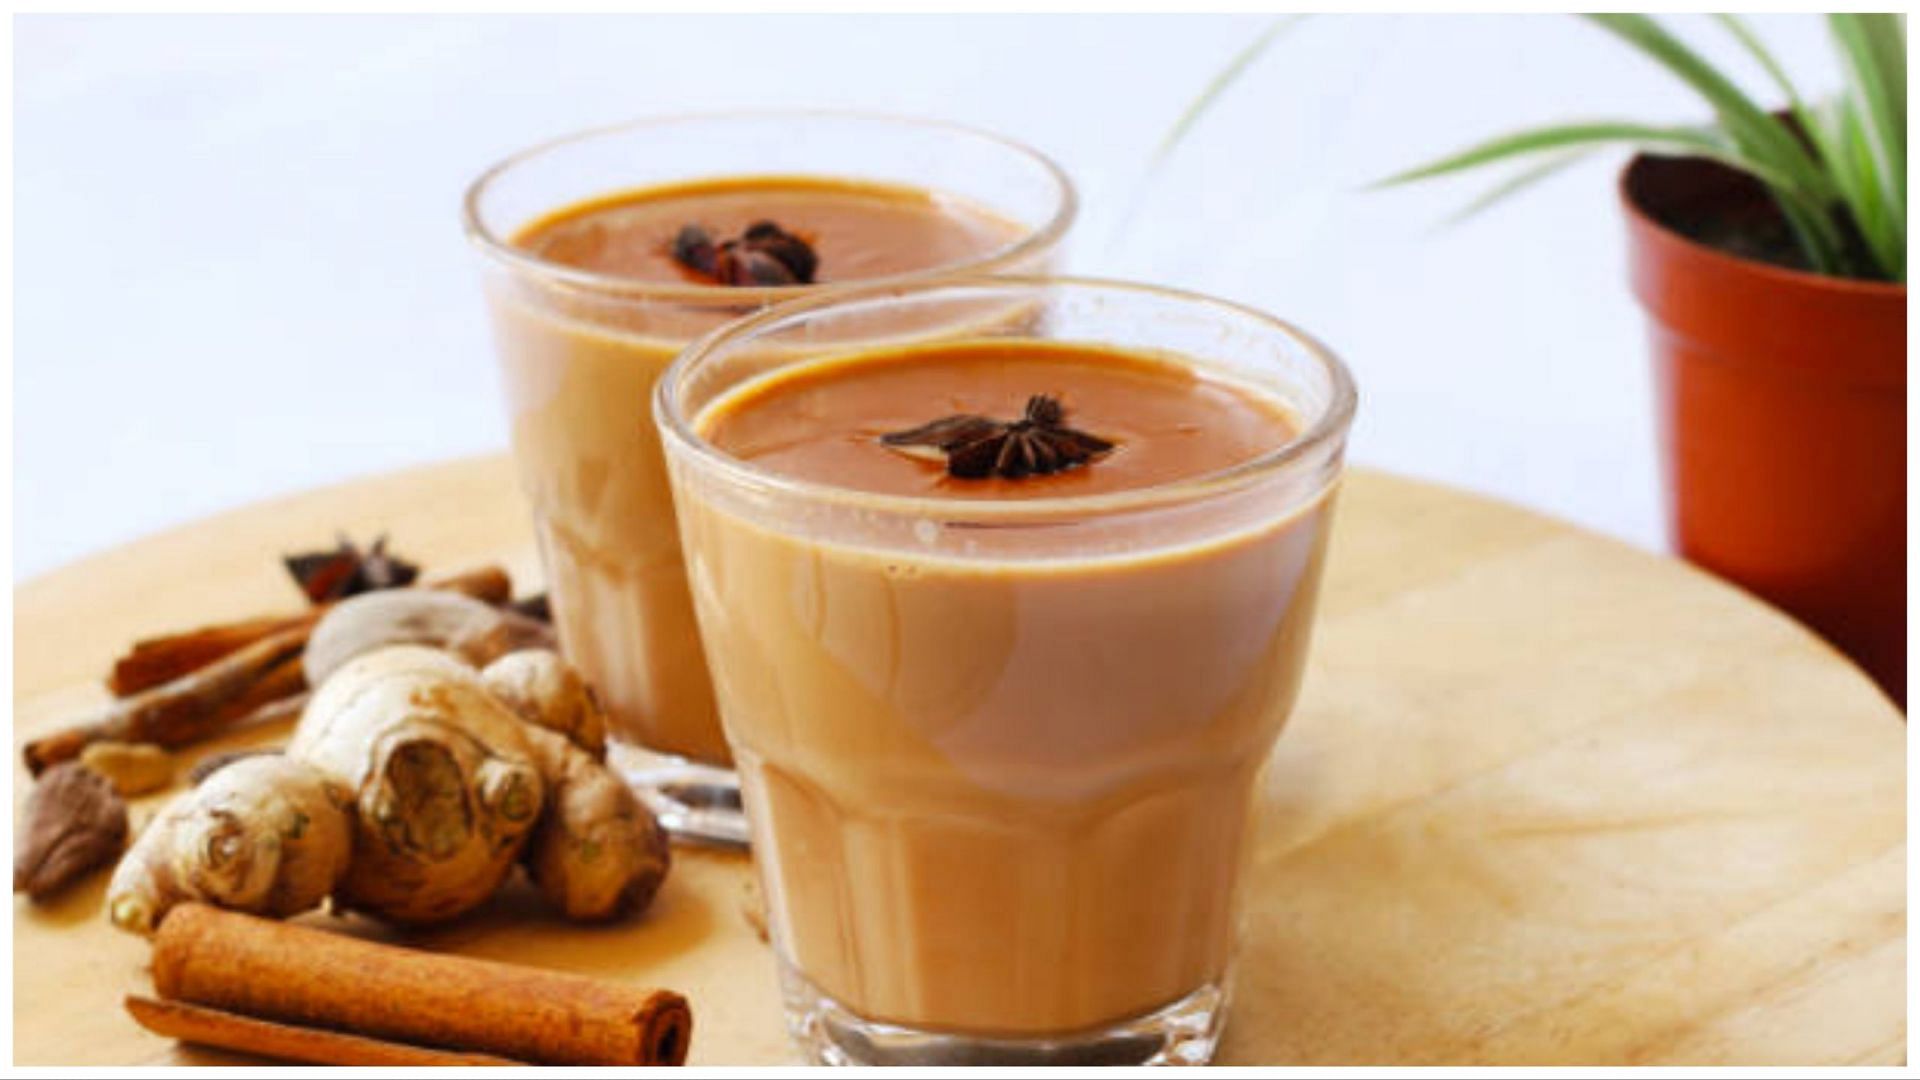 Ginger tea can help reduce inflammation. (Image sourced via Getty Images)